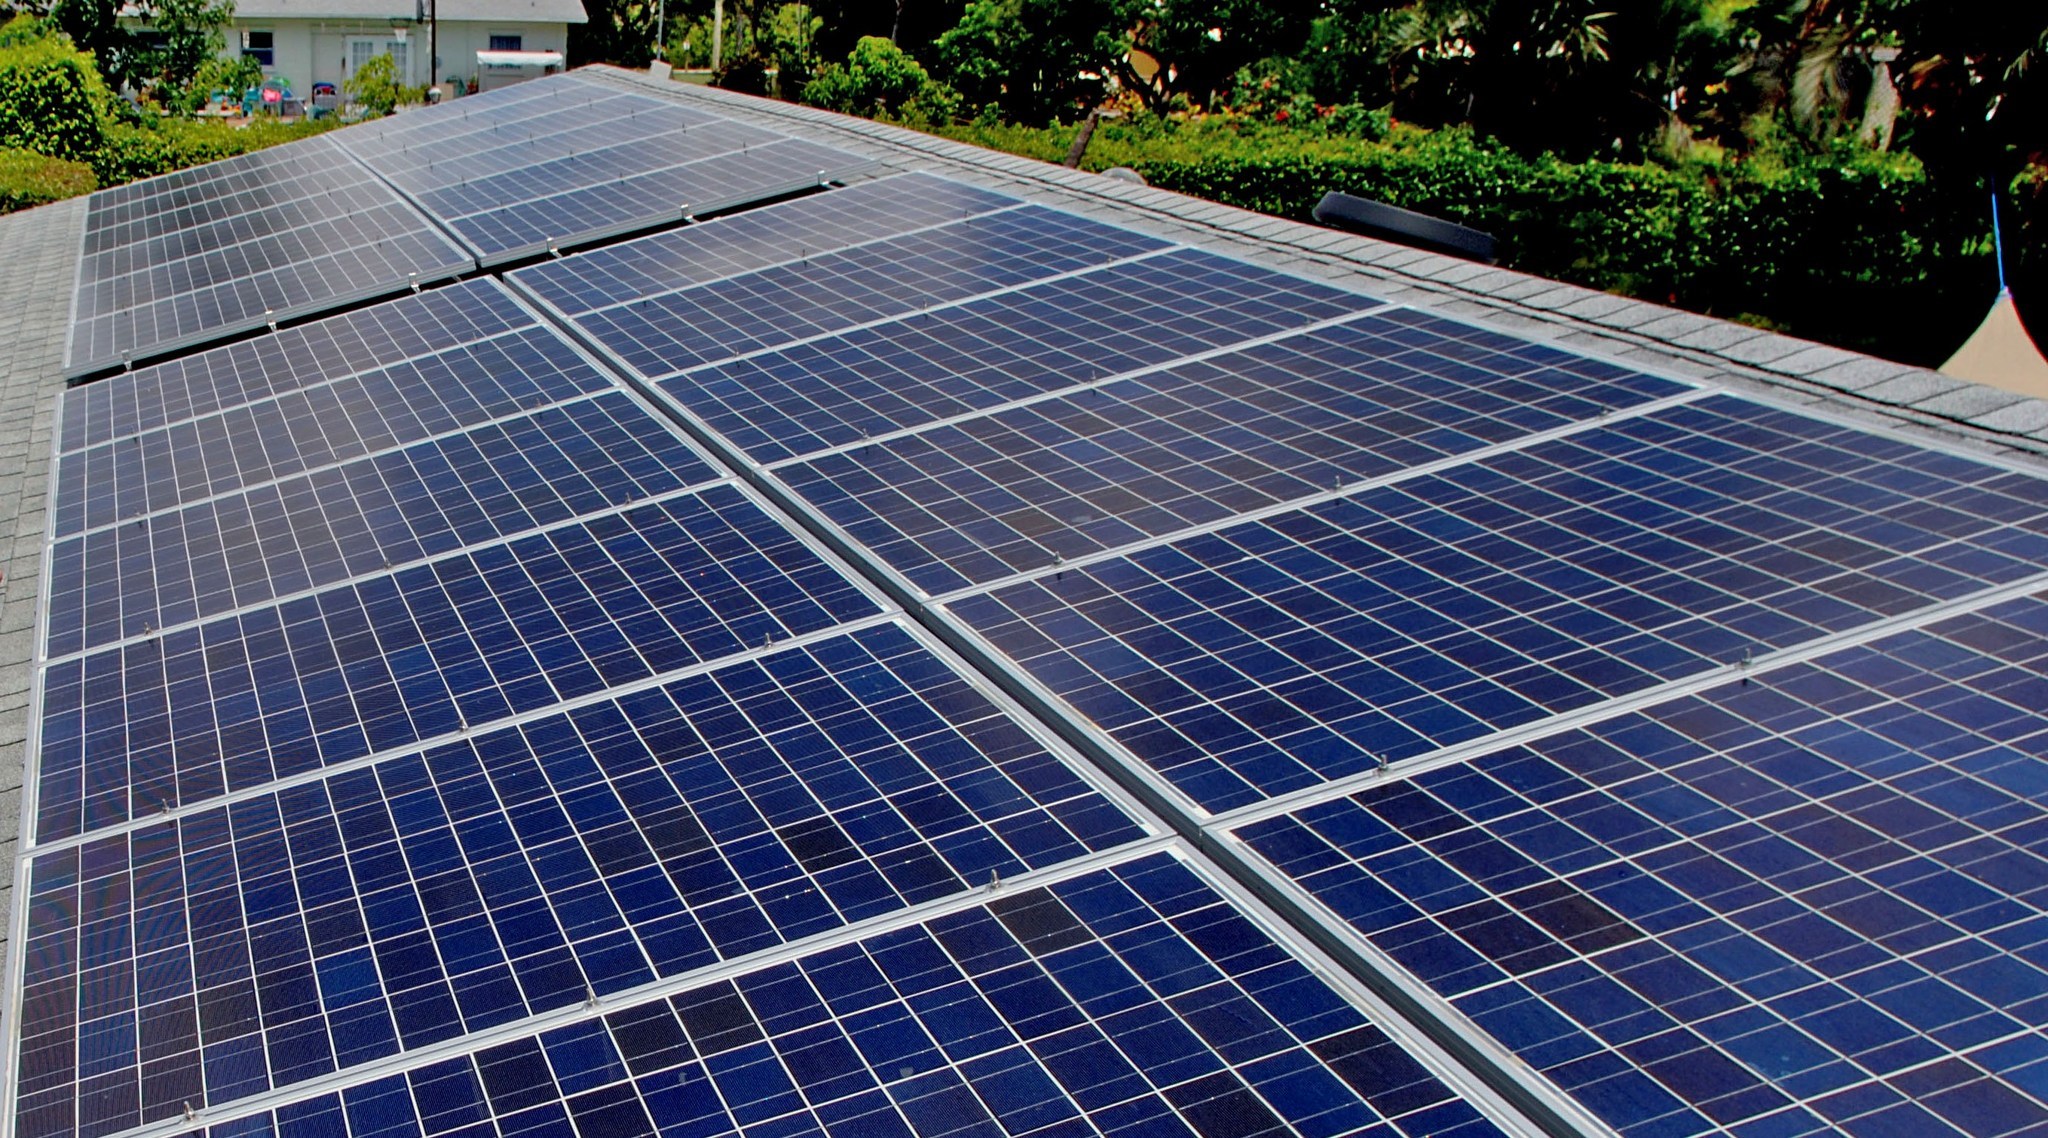 fpl-to-offer-new-round-of-rebates-for-solar-panels-on-homes-wednesday